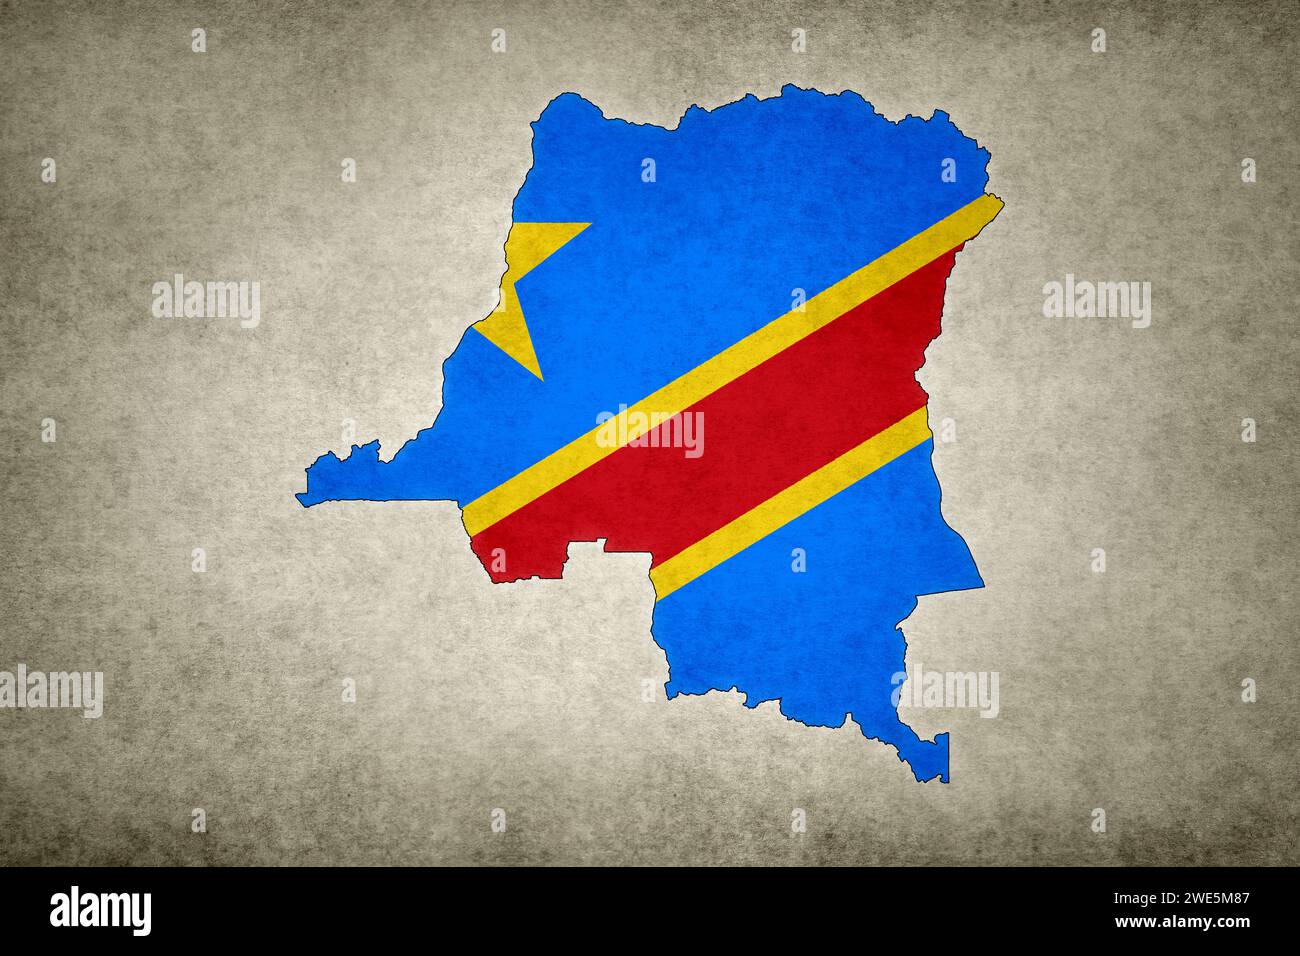 Grunge map of the Democratic Republic of the Congo with its flag printed within its border on an old paper. Stock Photo